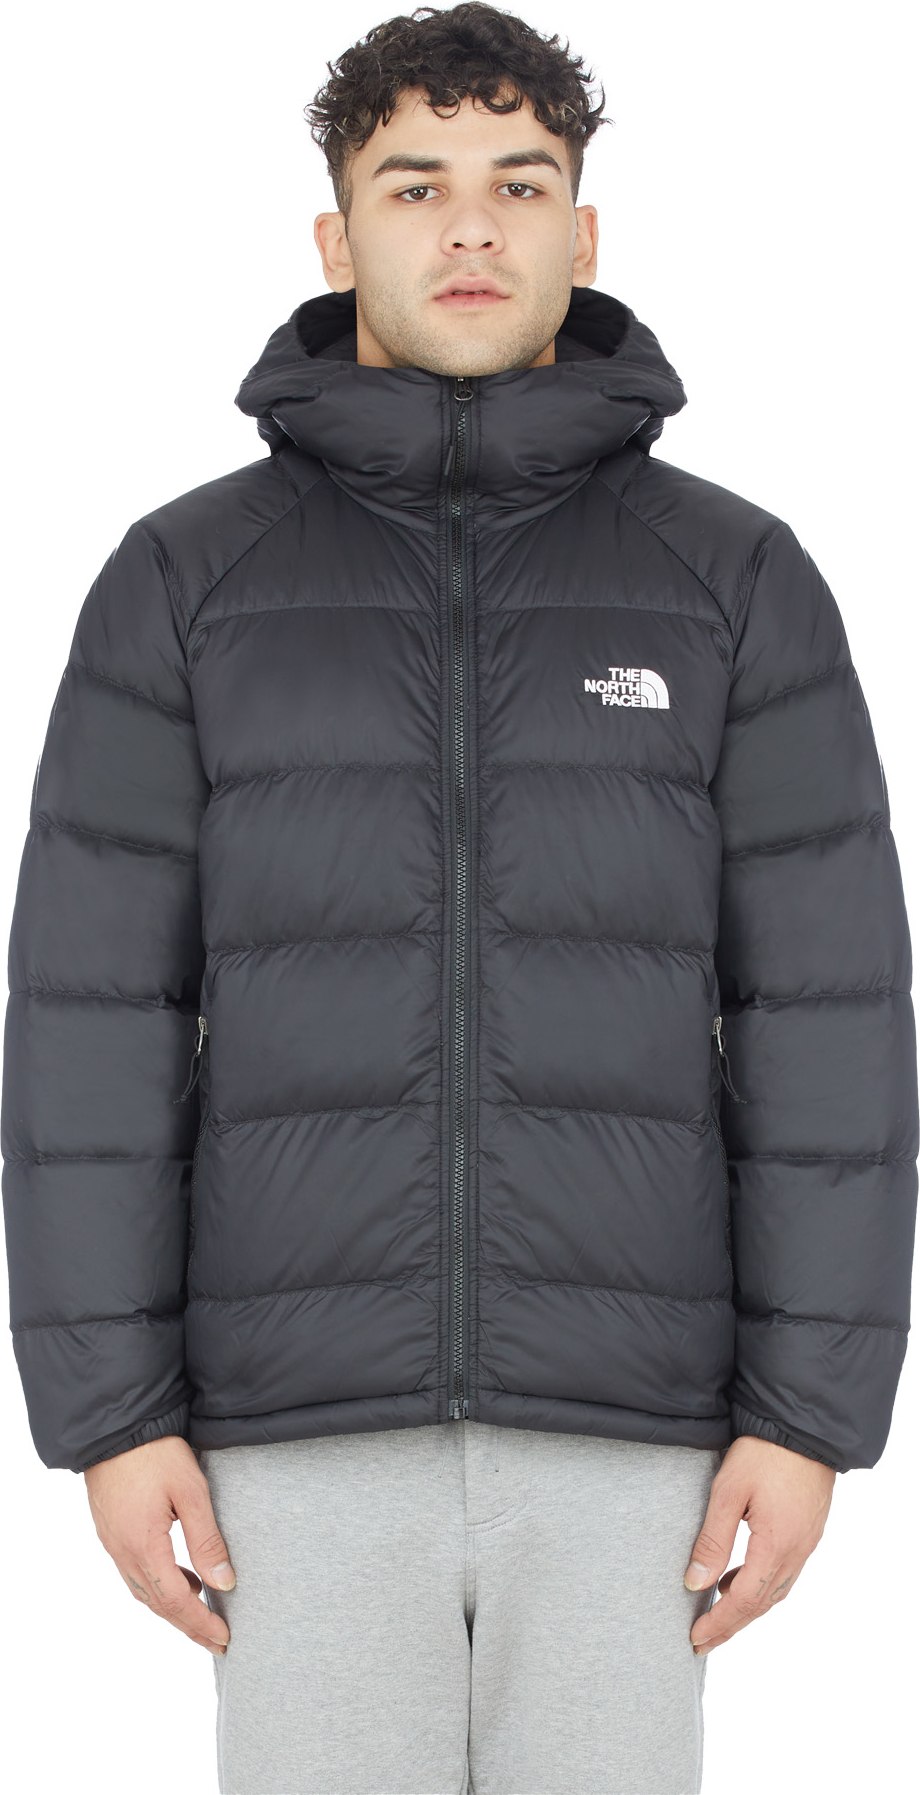 The North Face - Hydrenalite Down Hoodie